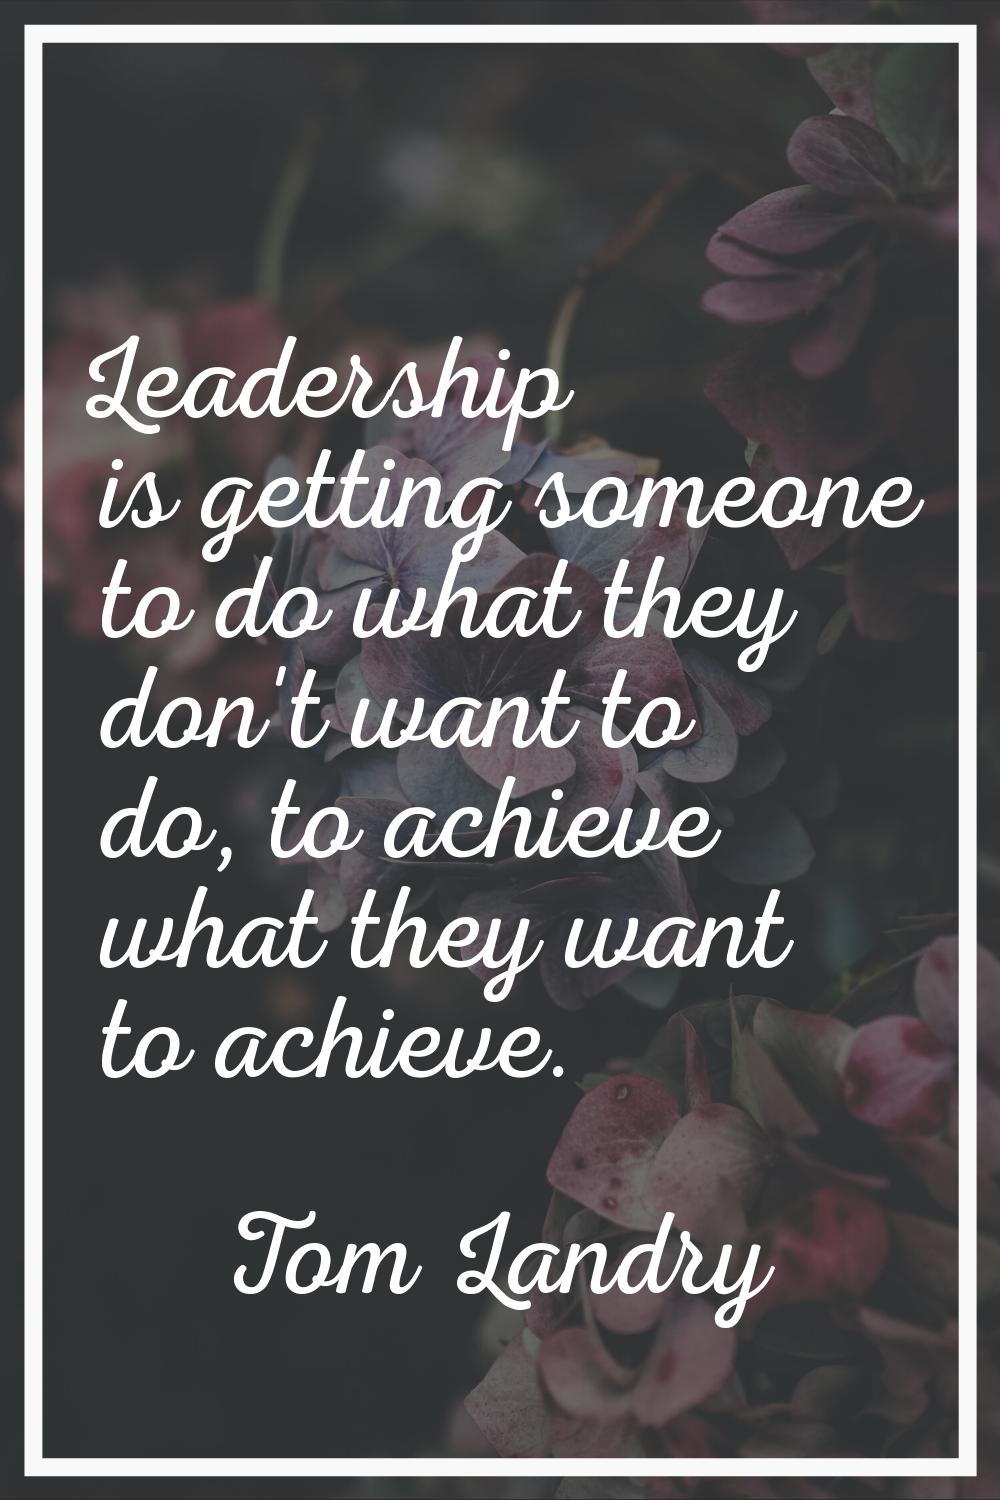 Leadership is getting someone to do what they don't want to do, to achieve what they want to achiev